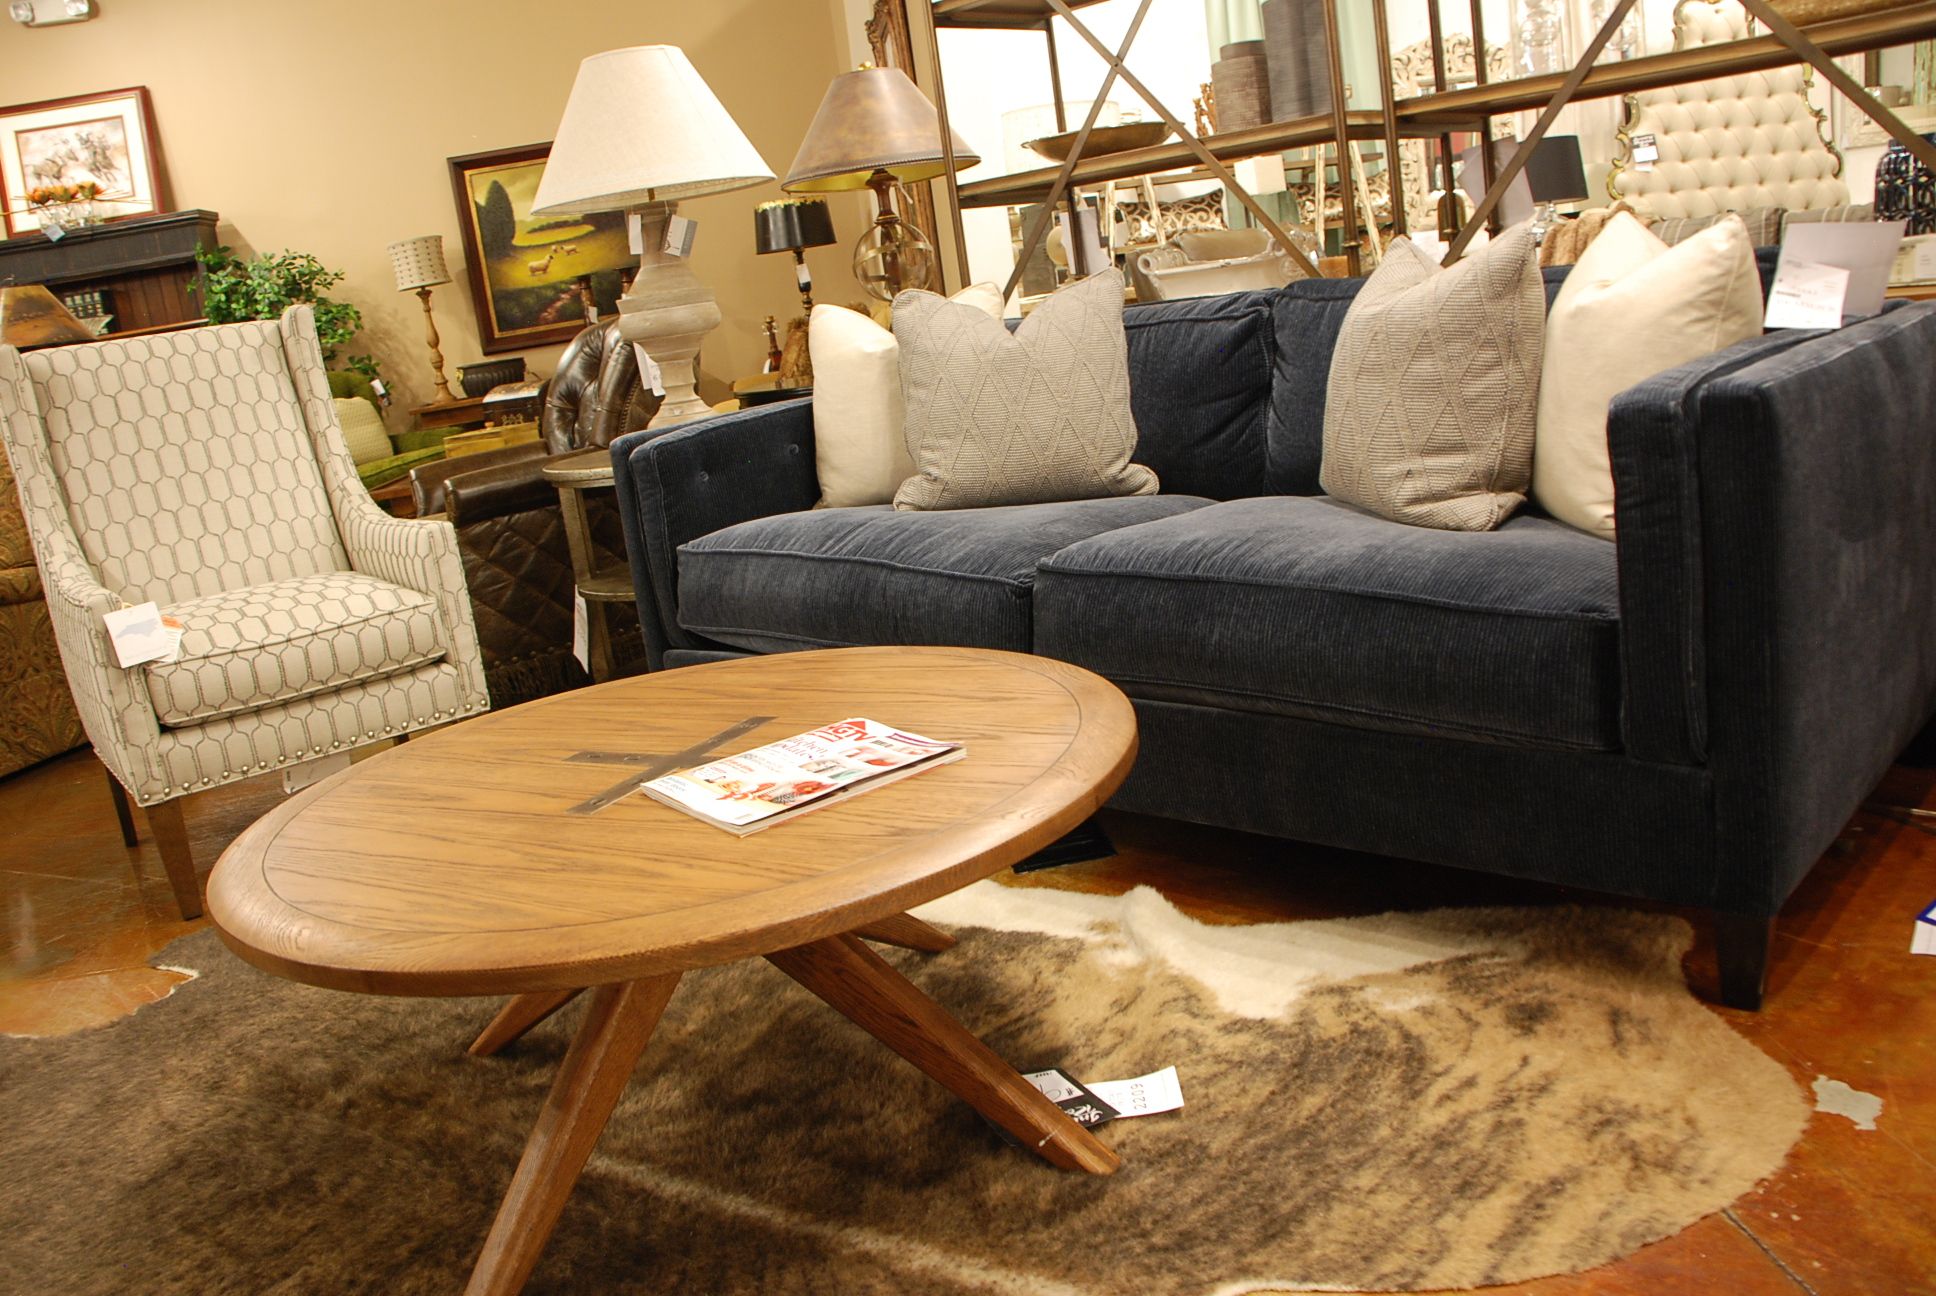 How Can Furniture Benefit Your Lifestyle?